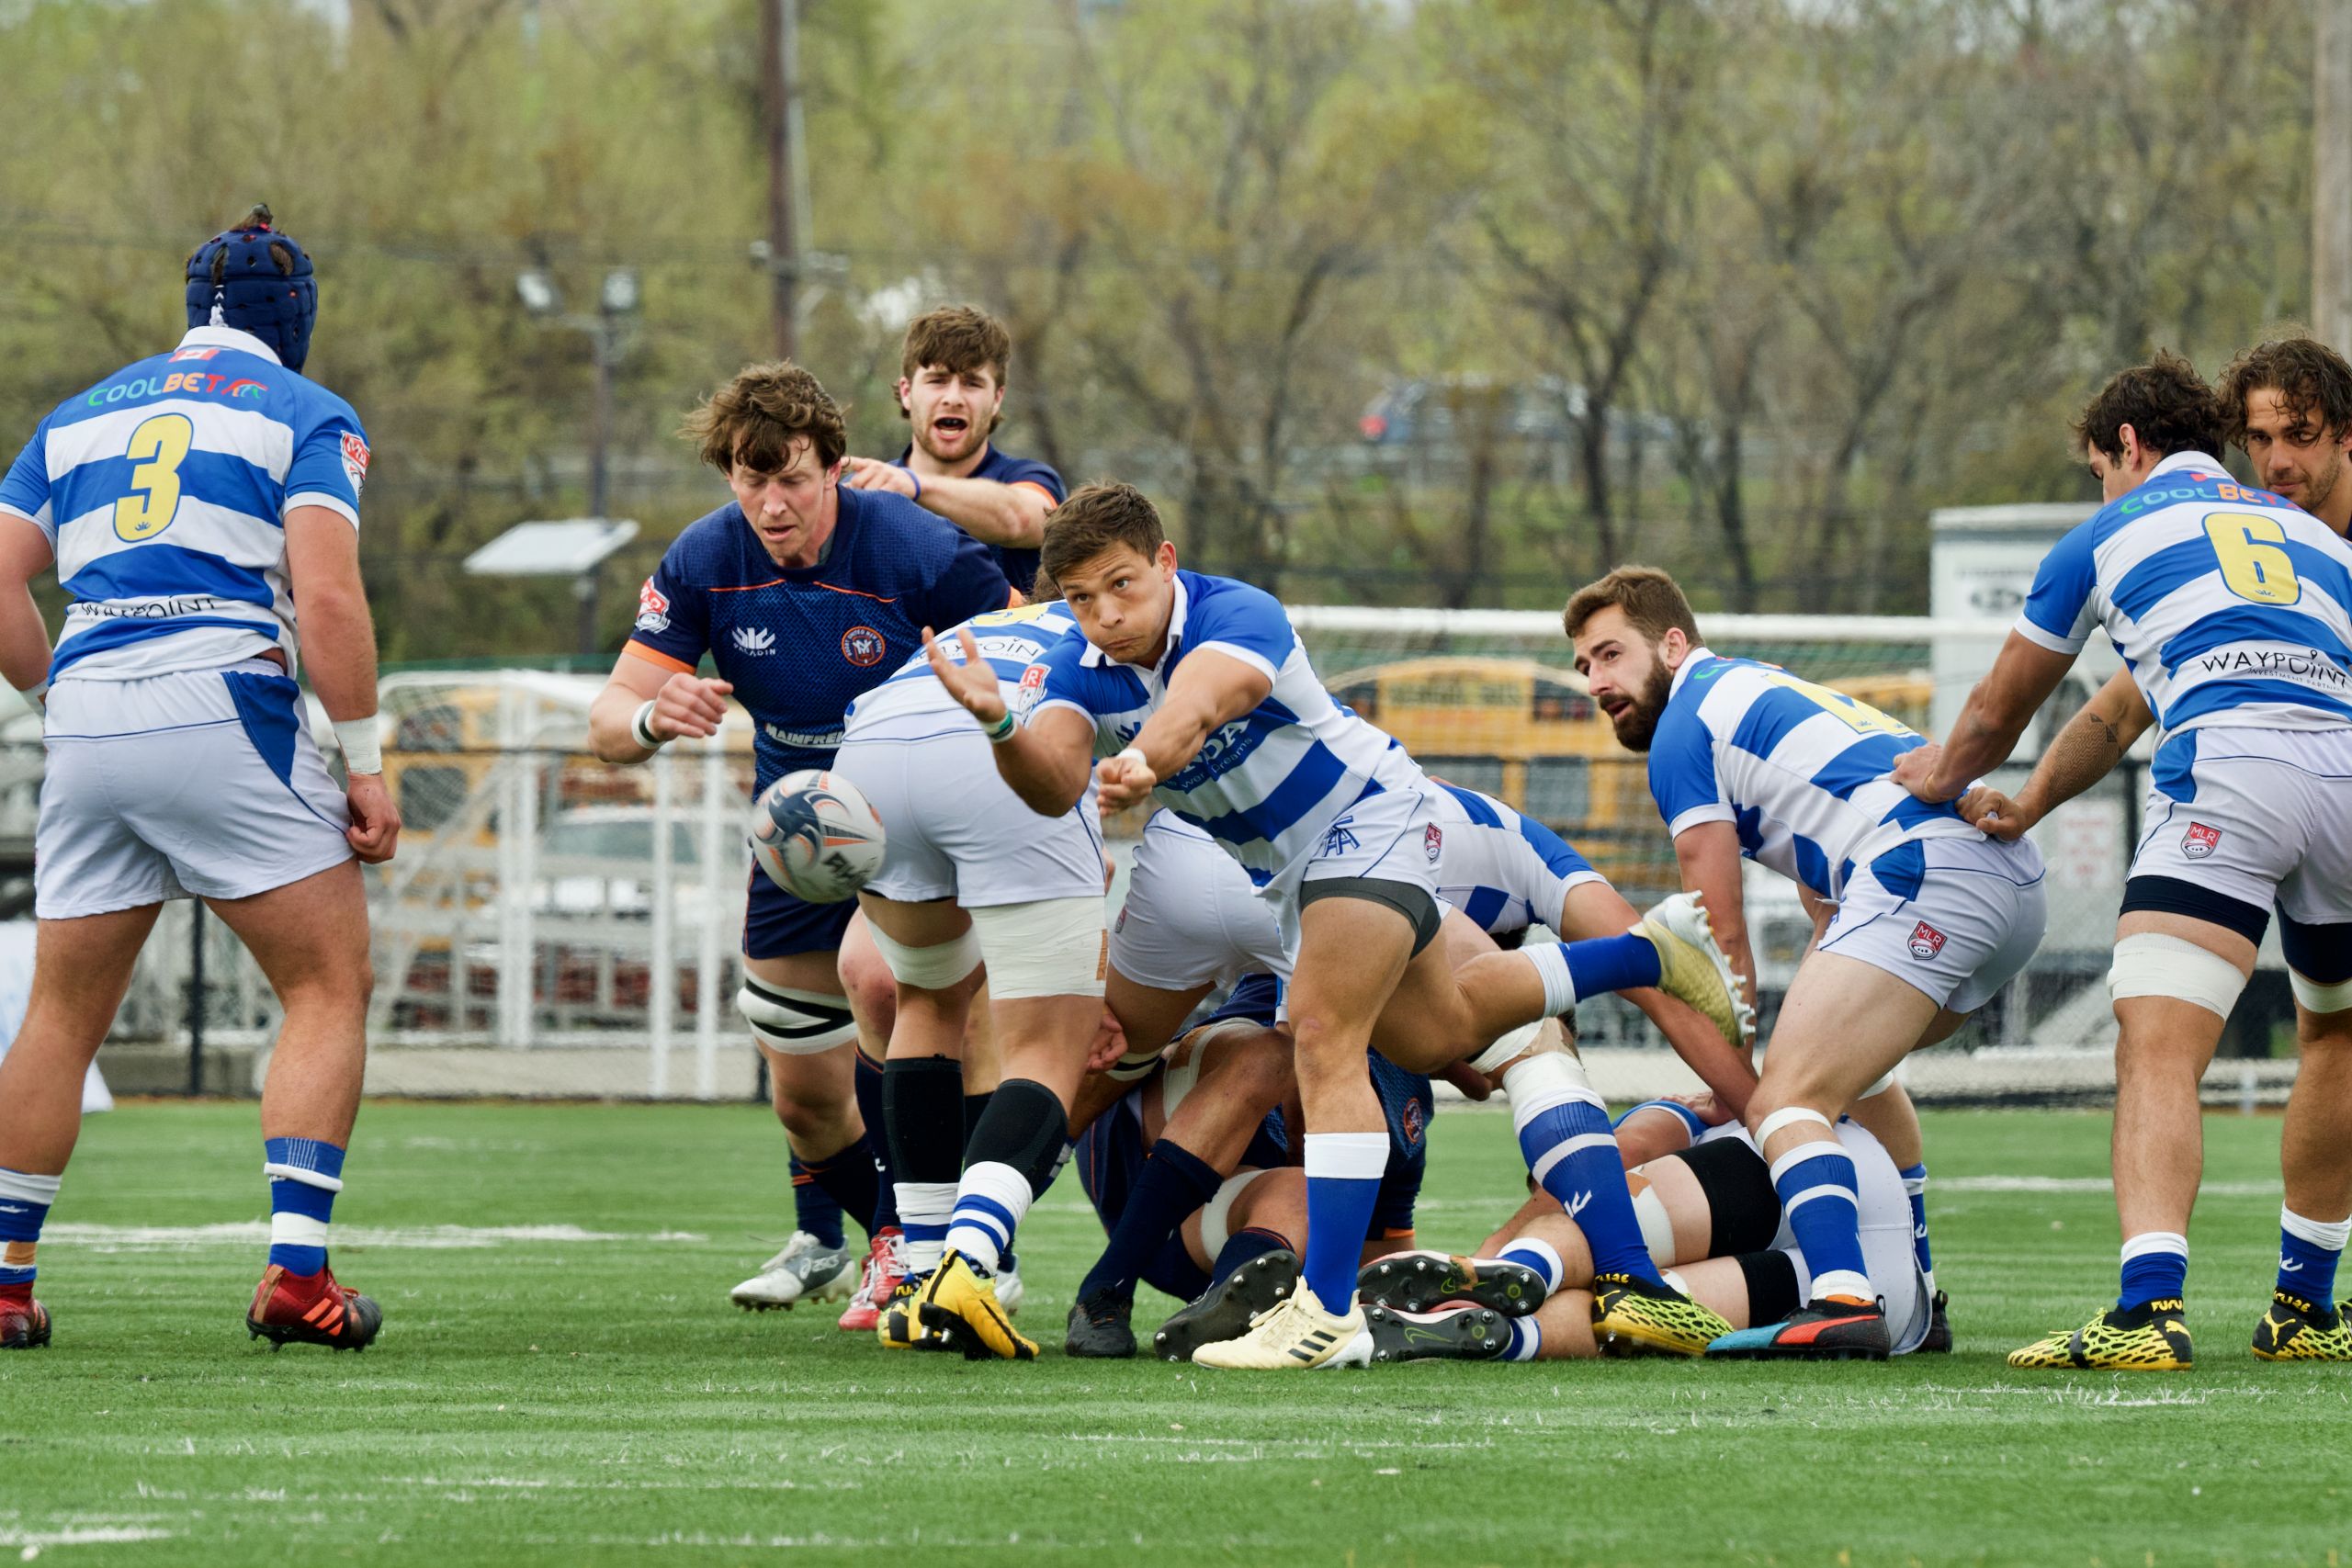 Broadcast Details: Toronto Arrows vs. Rugby United New York (June 26, 2021)